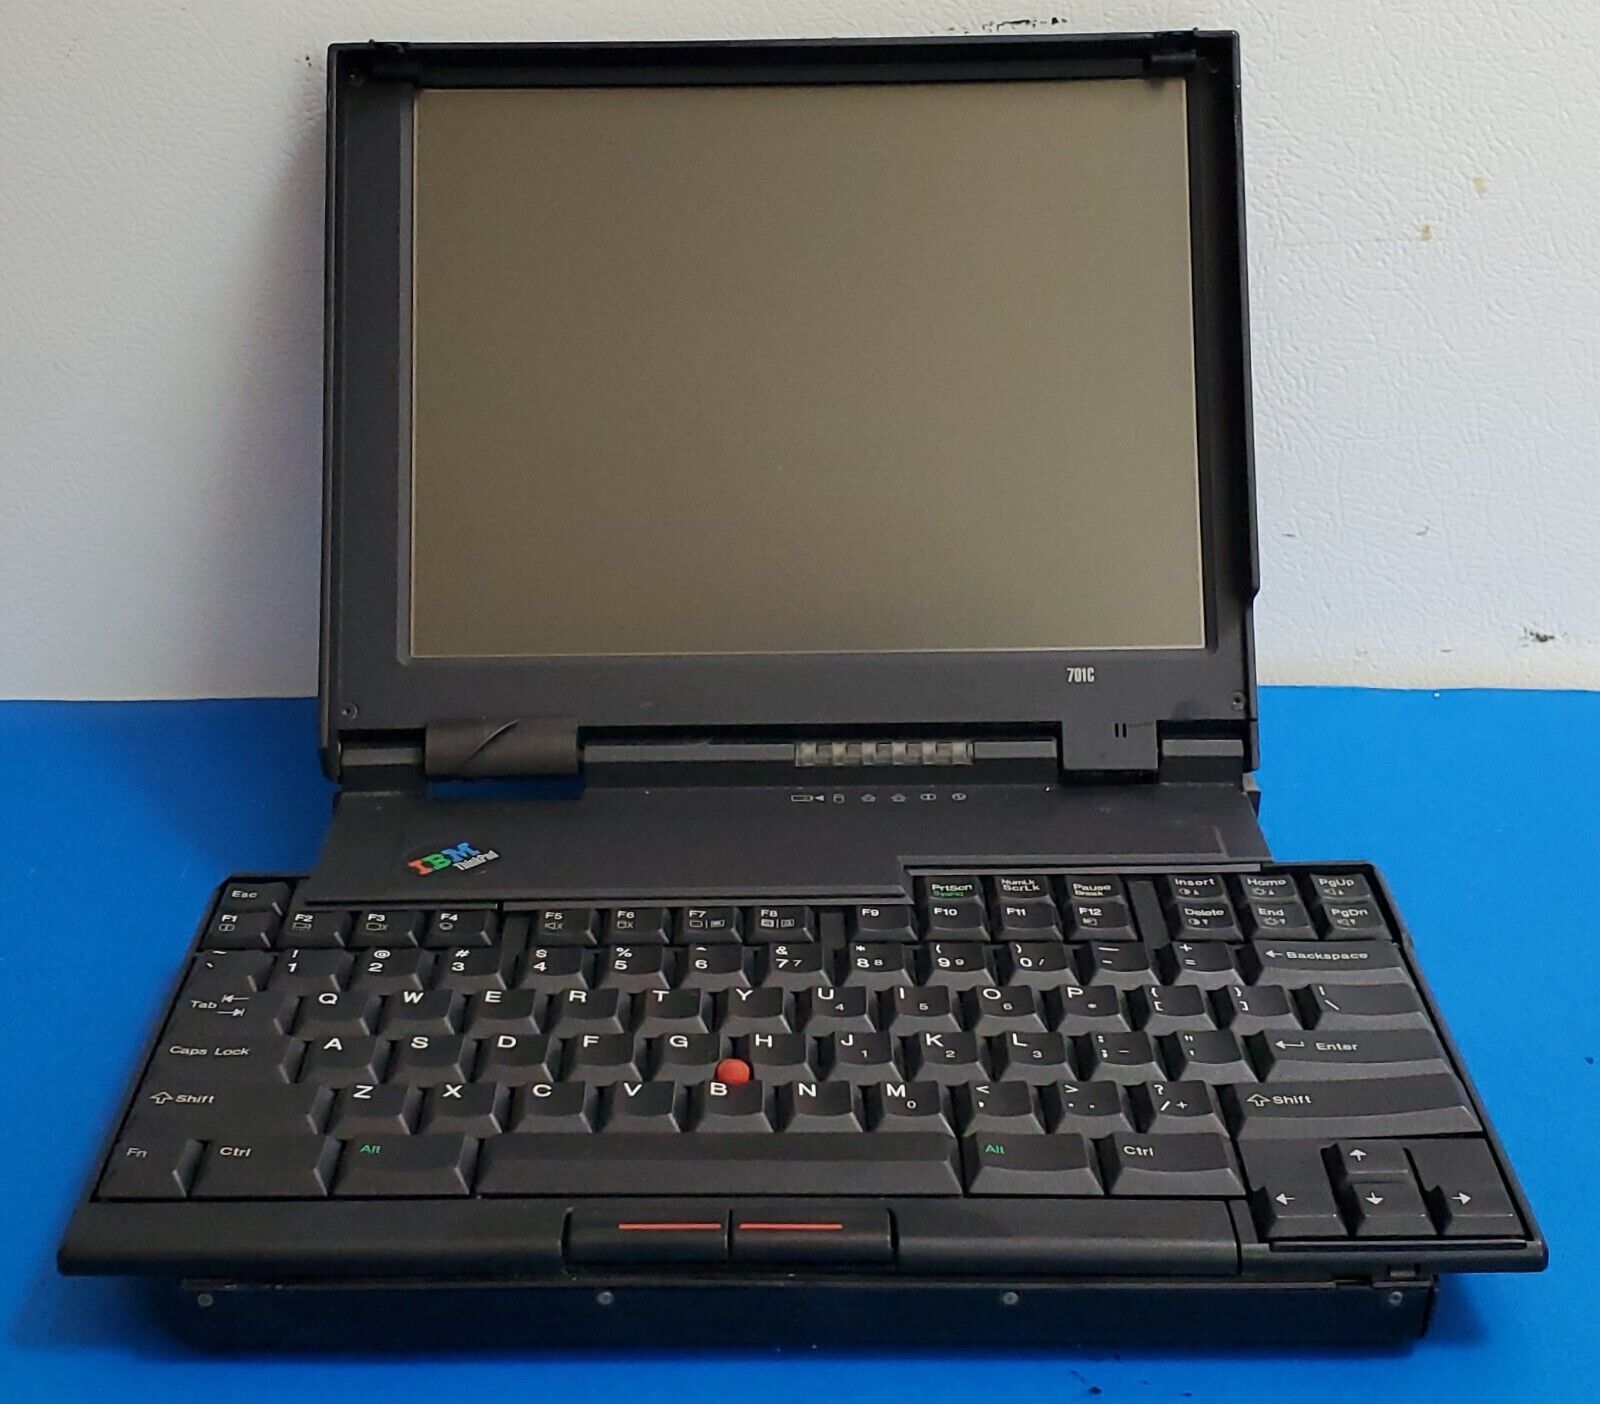 IBM Thinkpad 701c Laptop Computer Butterfly Keyboard RARE Vintage - SOLD AS IS